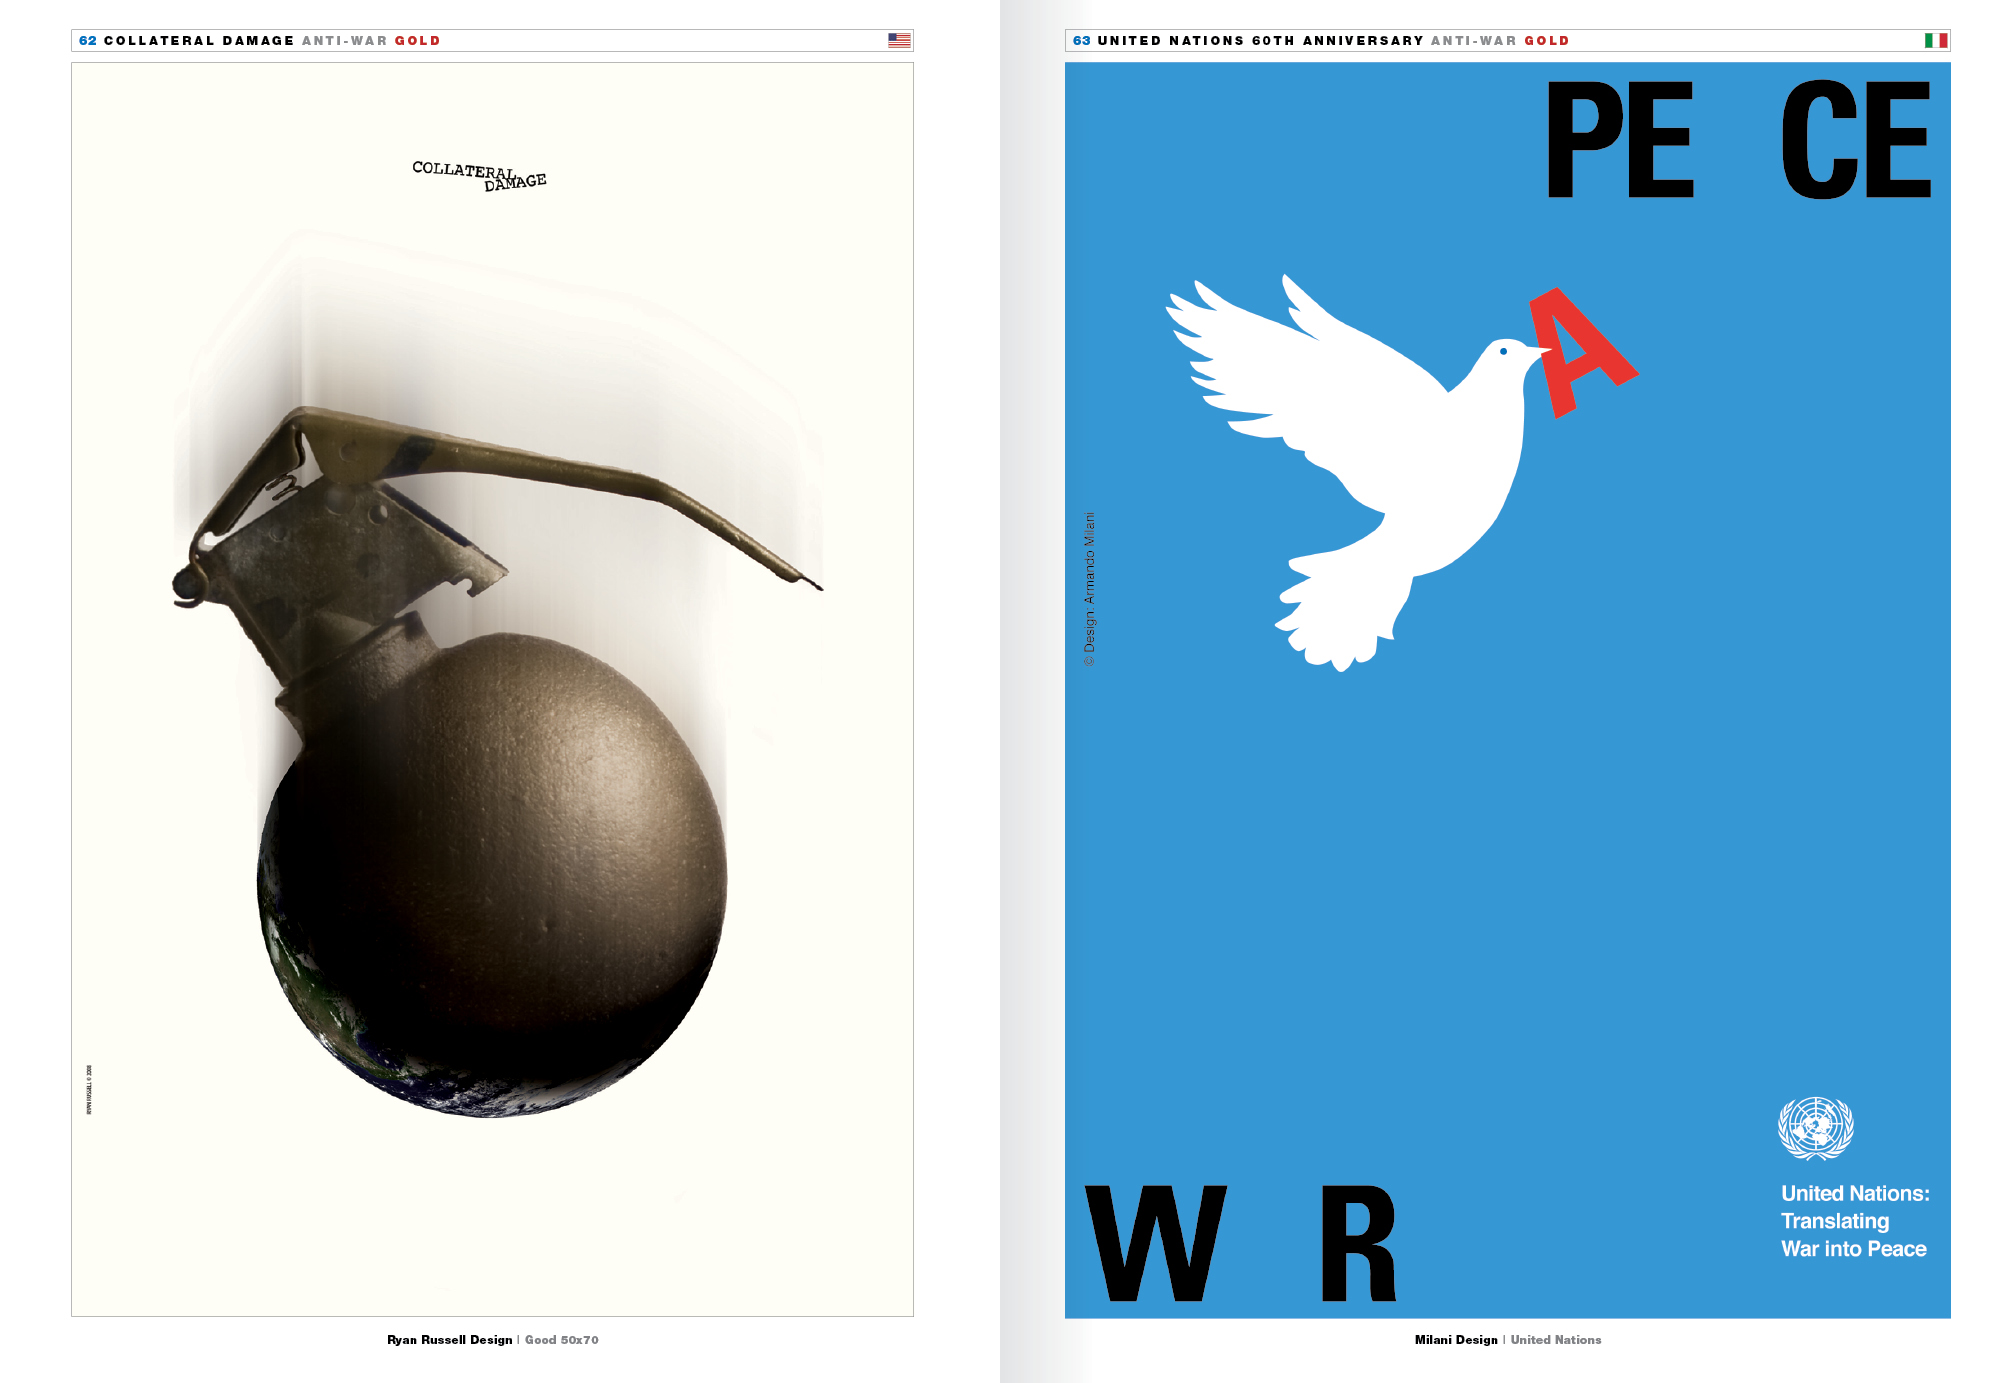 You are currently viewing “Futuring Peace”, a call for artists to create posters for the United Nations